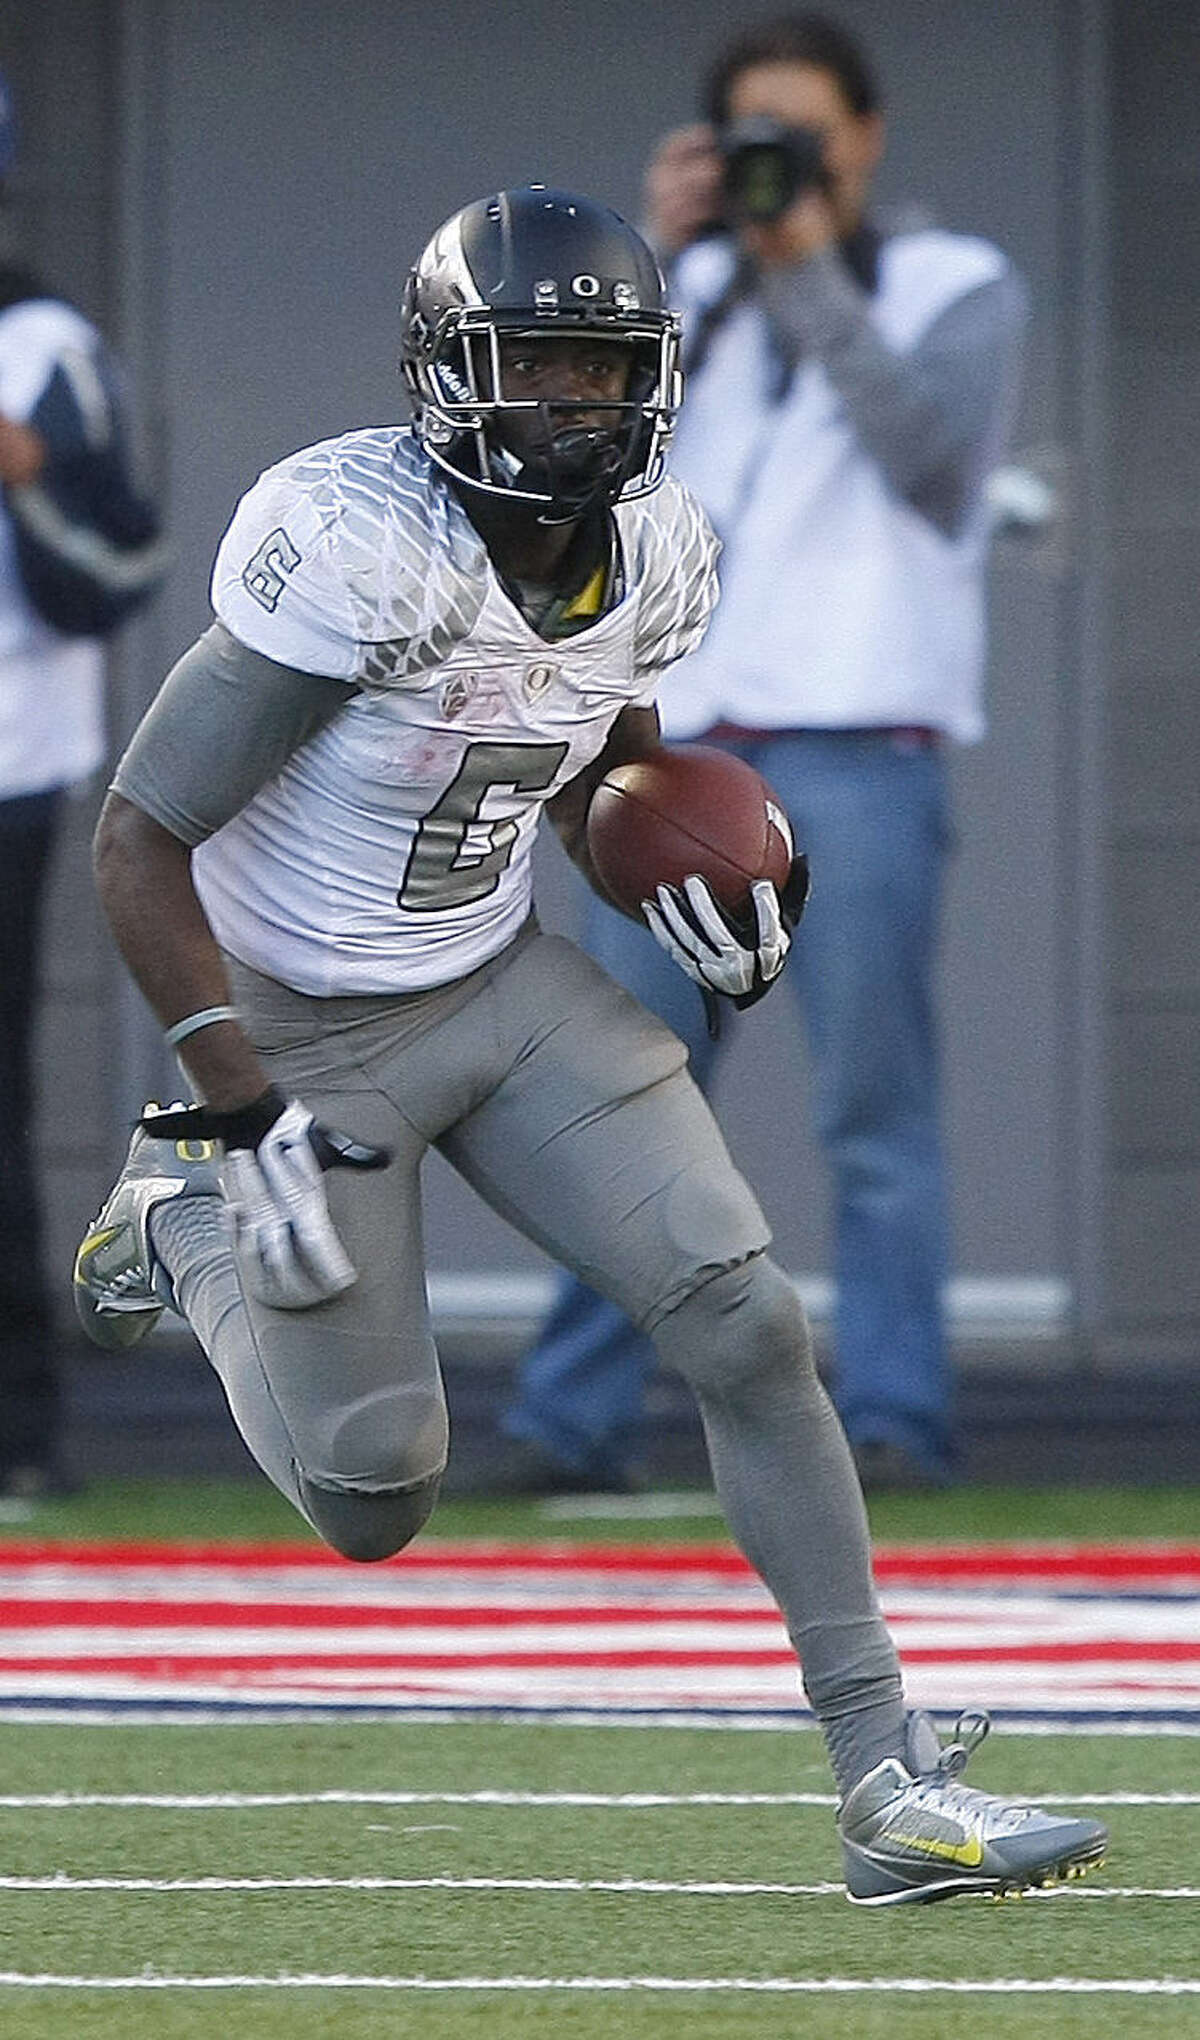 Running back De'Anthony Thomas is one of Oregon's many backfield options and a great returner.